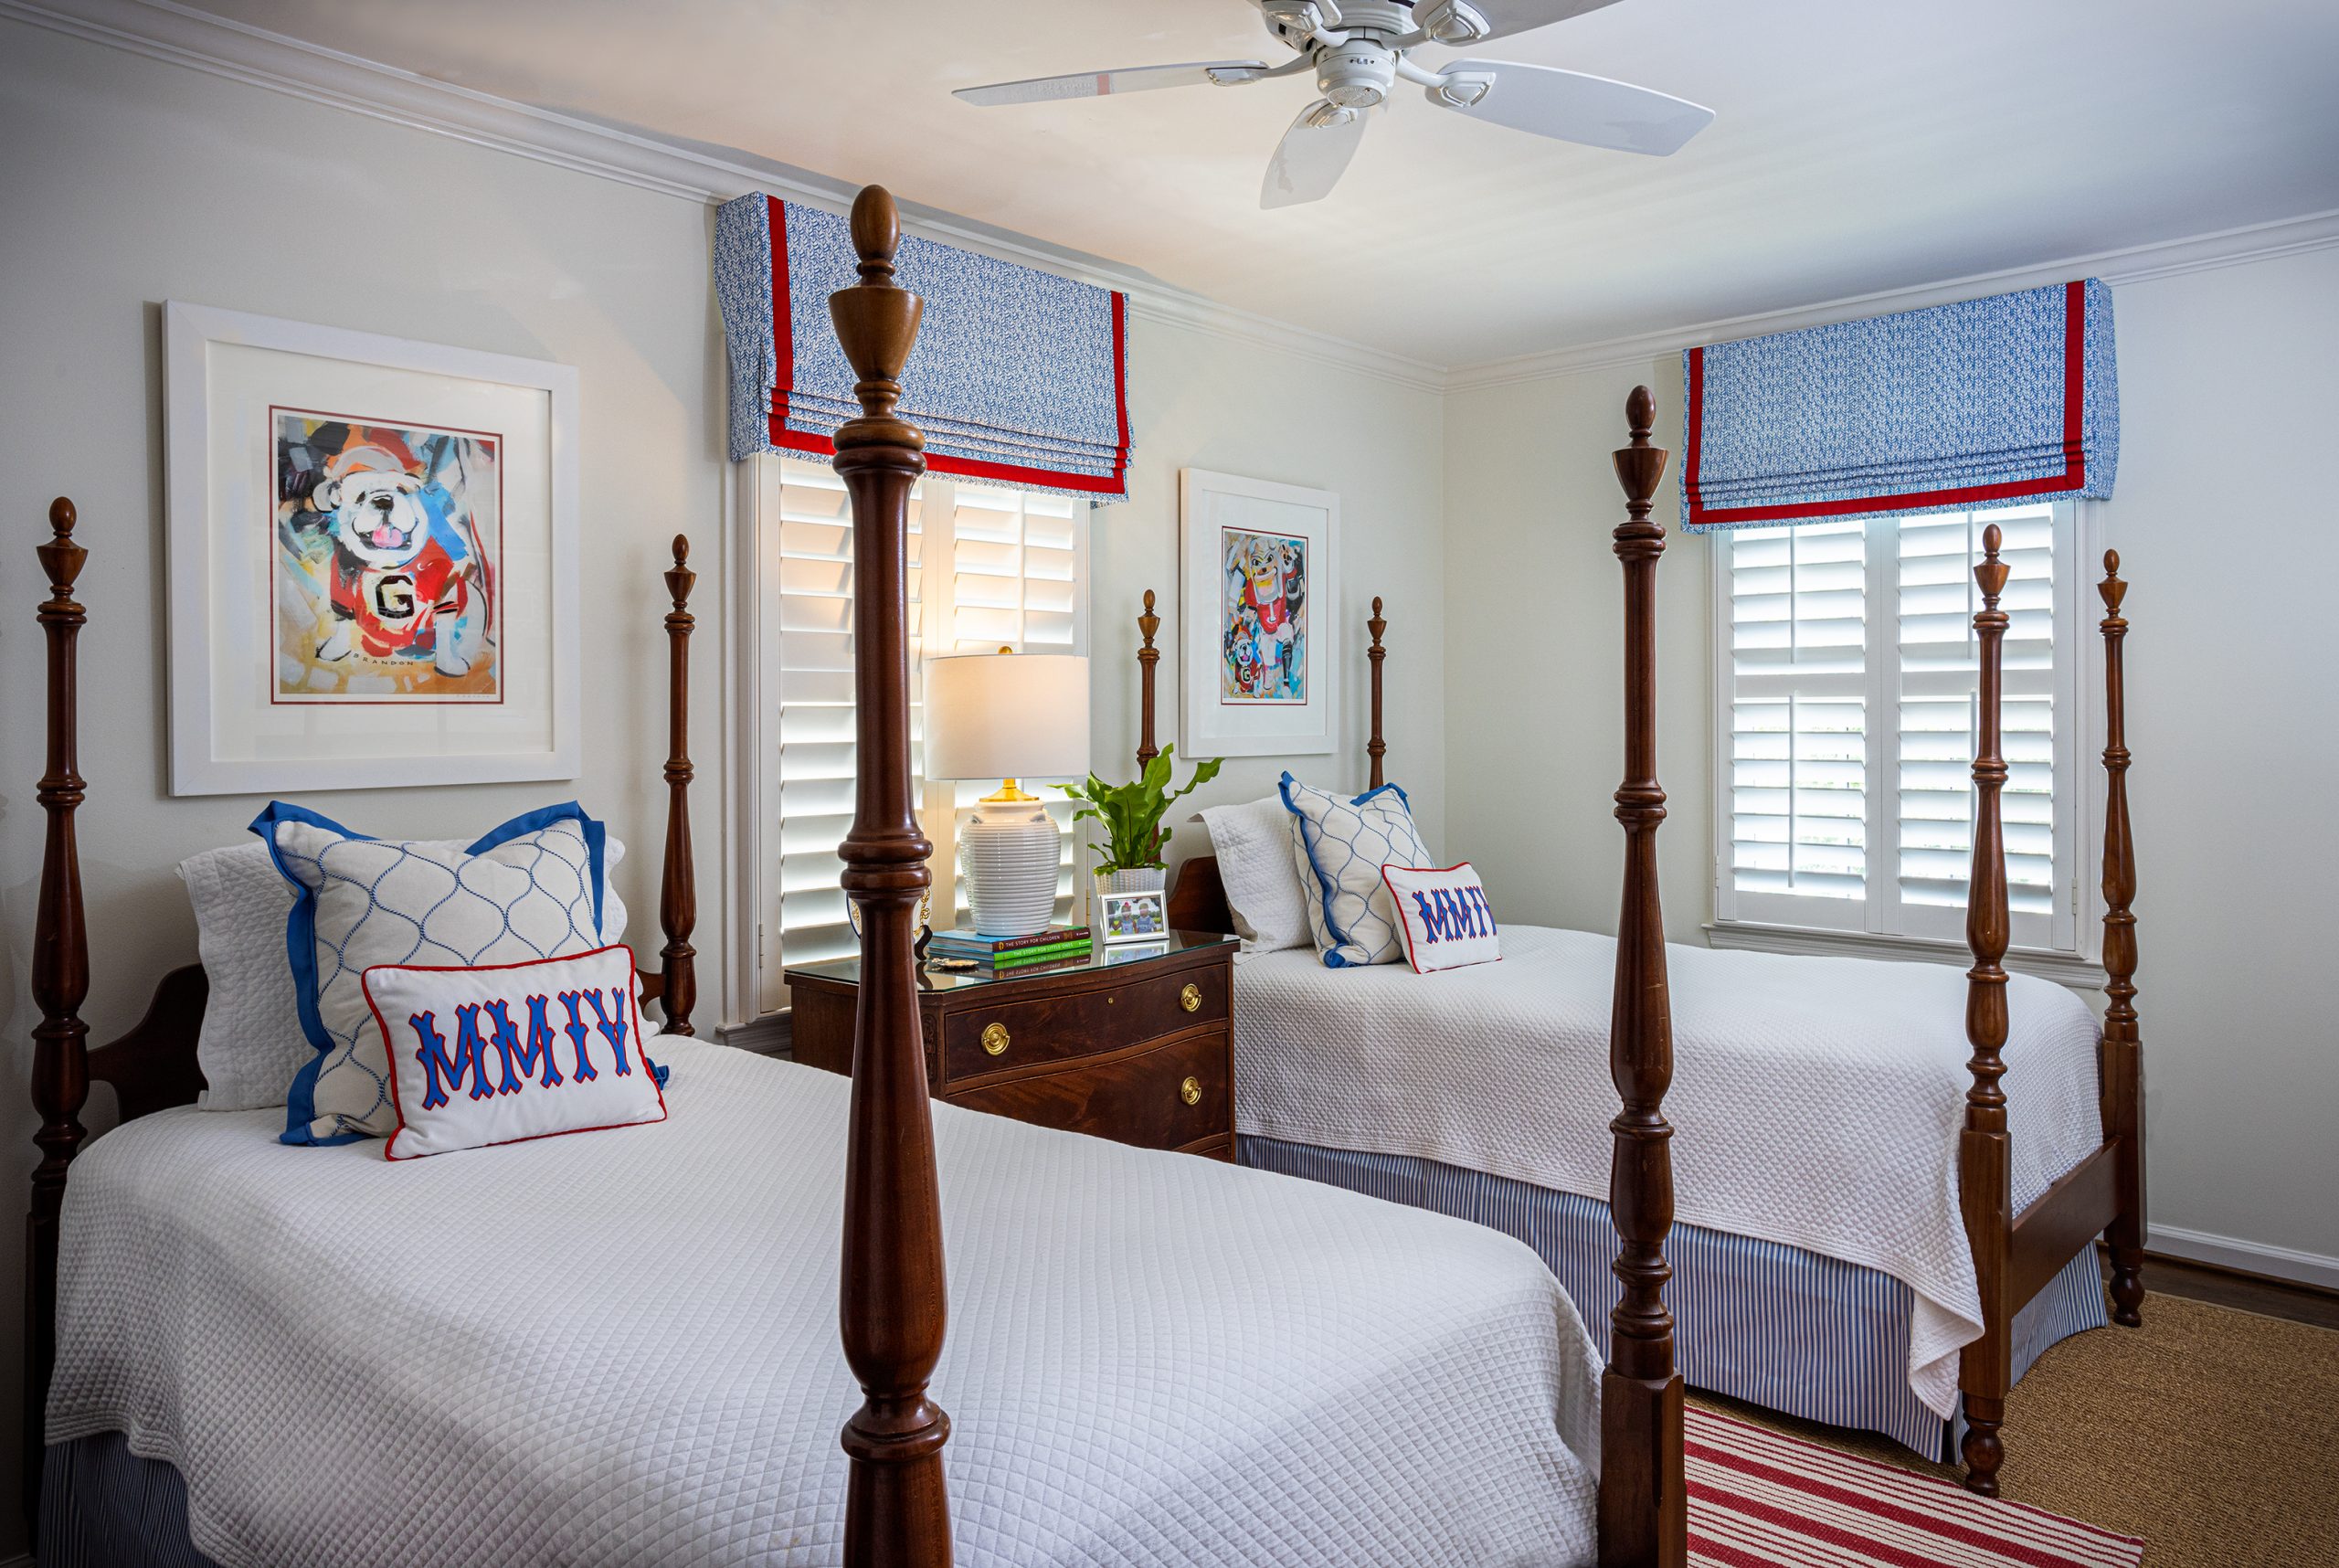 The Andersons’ interior designer, Elizabeth Newman, created the nautical theme for Marshall’s room. Marshall prefers to see the red accent as a shoutout to the Georgia Bulldogs — his favorite team!